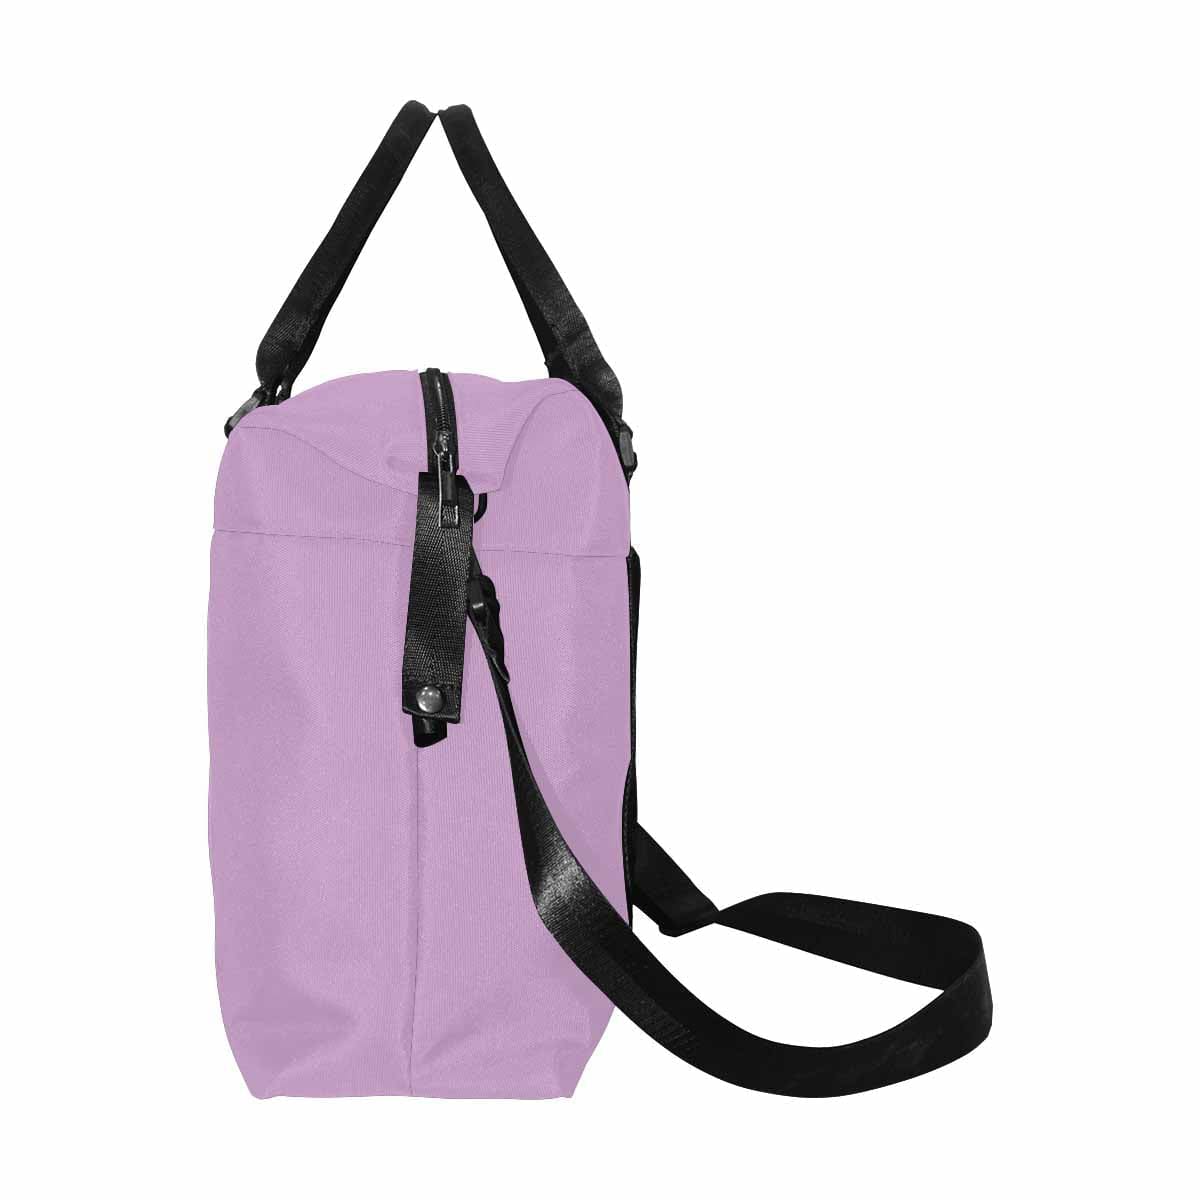 Lilac Purple Duffel Bag Large Travel Carry On - Bags | Duffel Bags